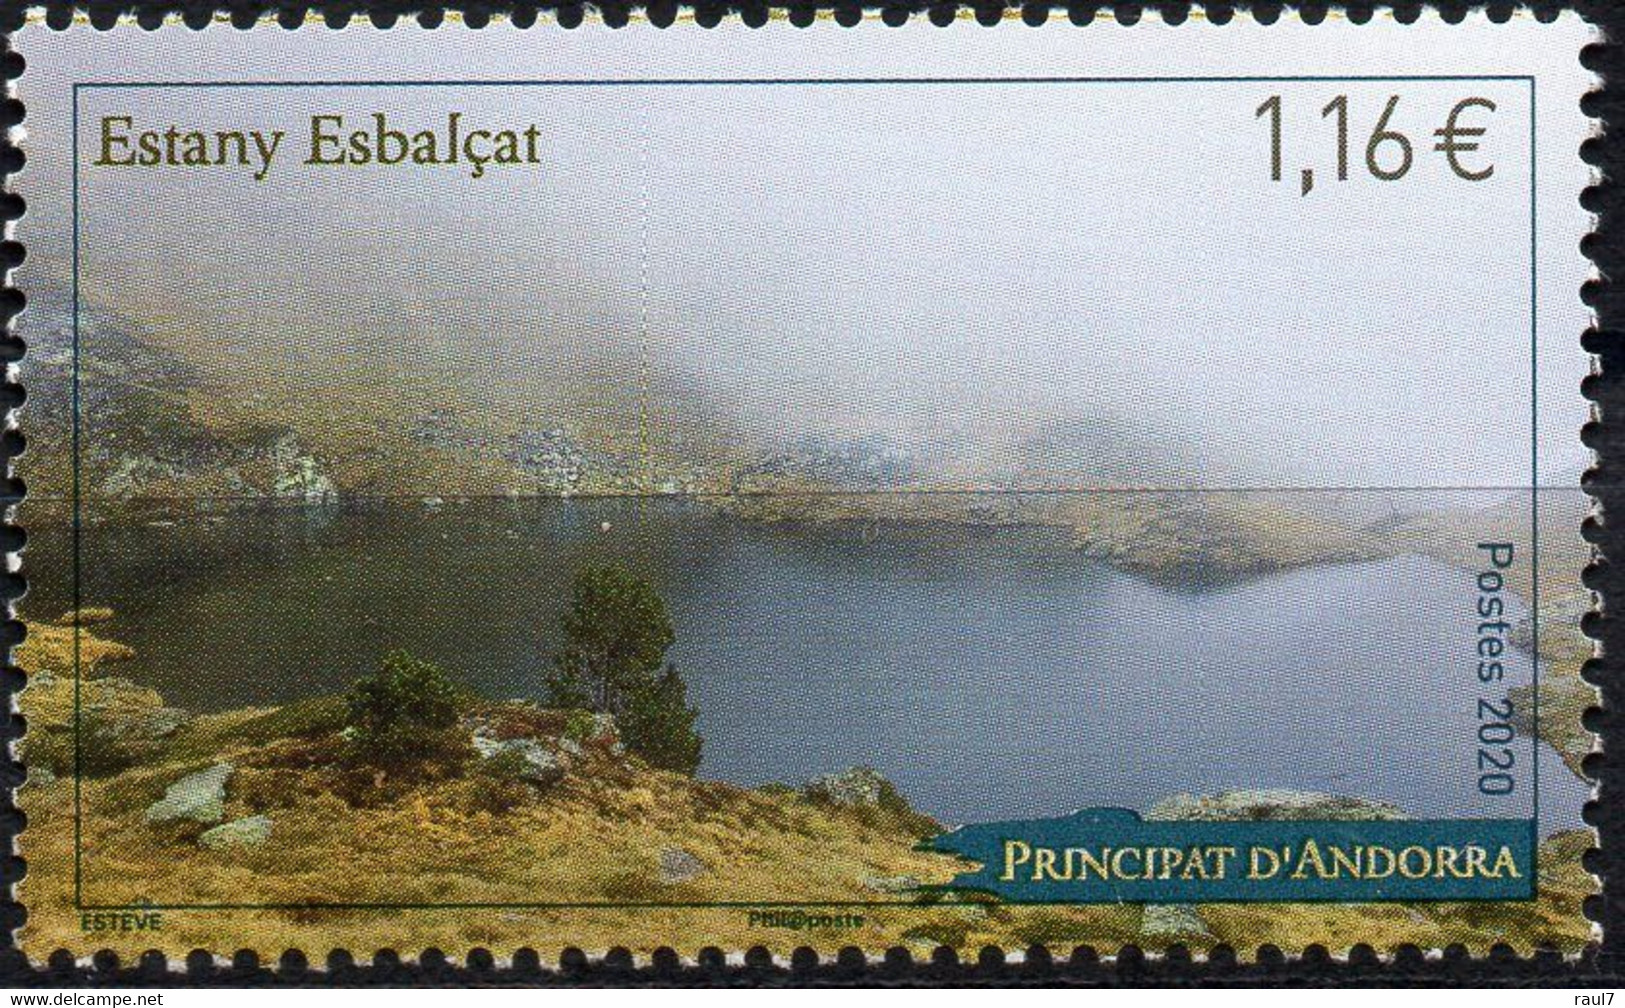 ANDORRE Fr. 2020 - Paysages, Lac, Montagne - 1 Val Neufs // Mnh - Unused Stamps